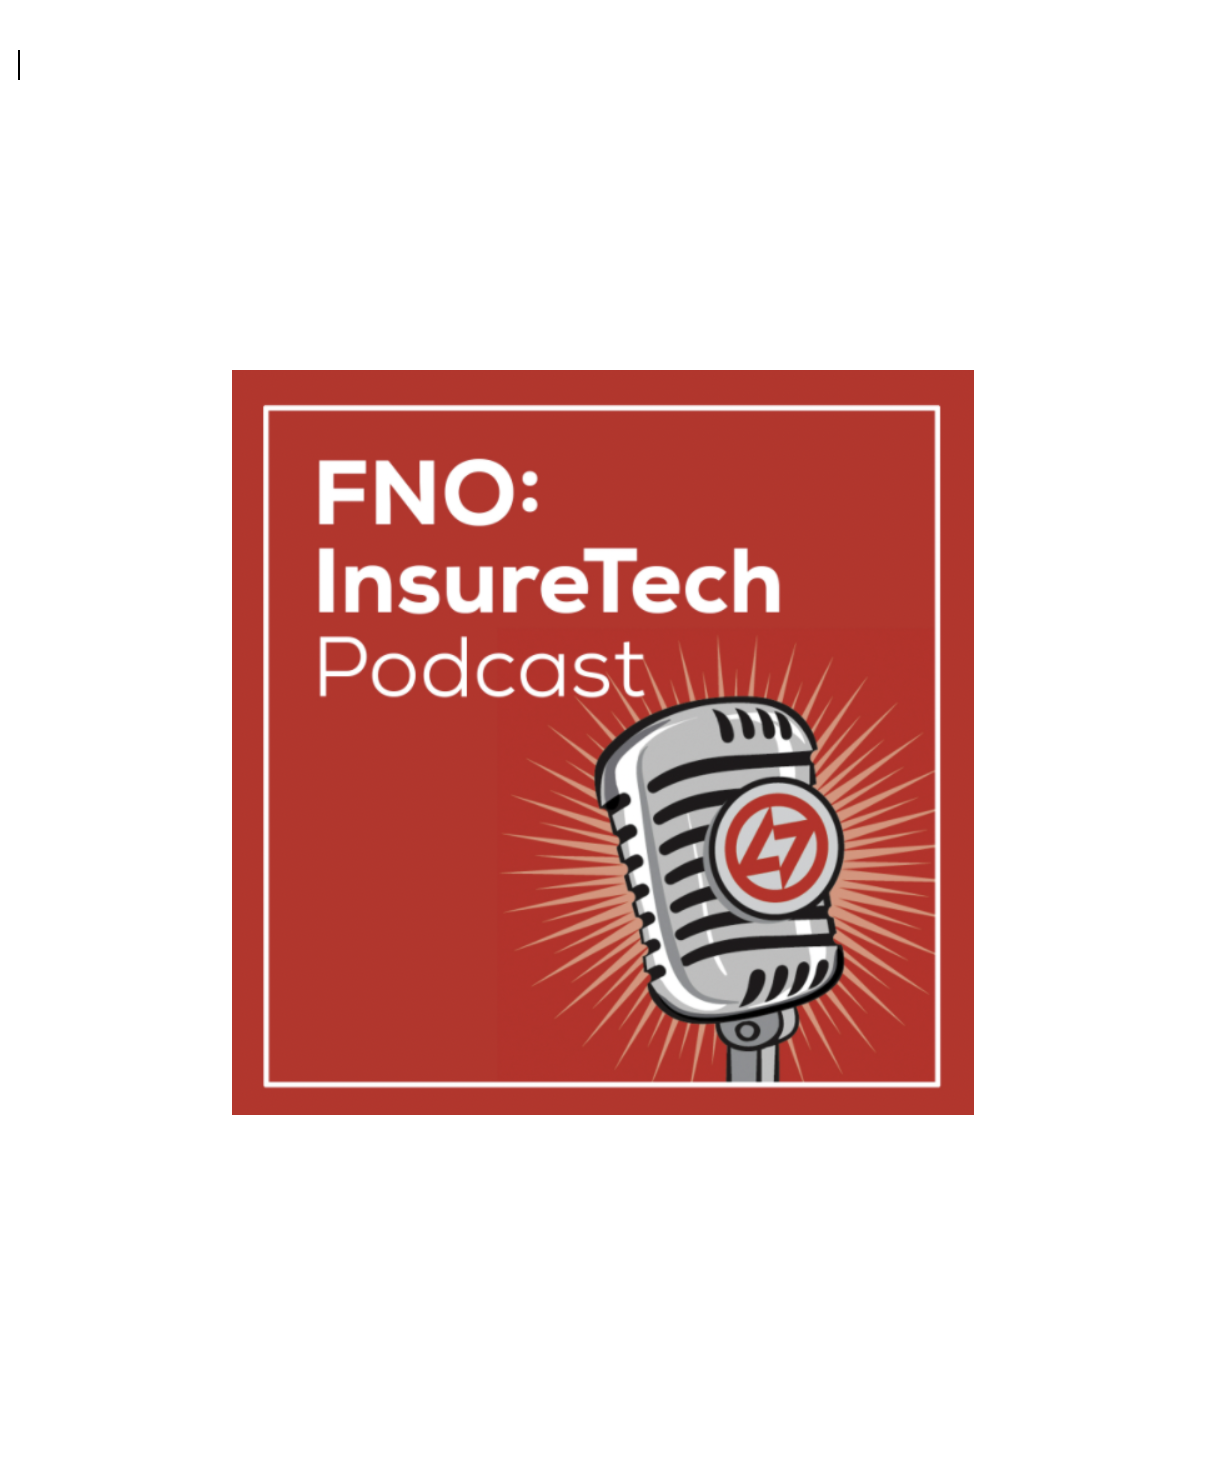 Mighty Capital Partner Matthias Weber Interviewed on the FNO: InsureTech Podcast